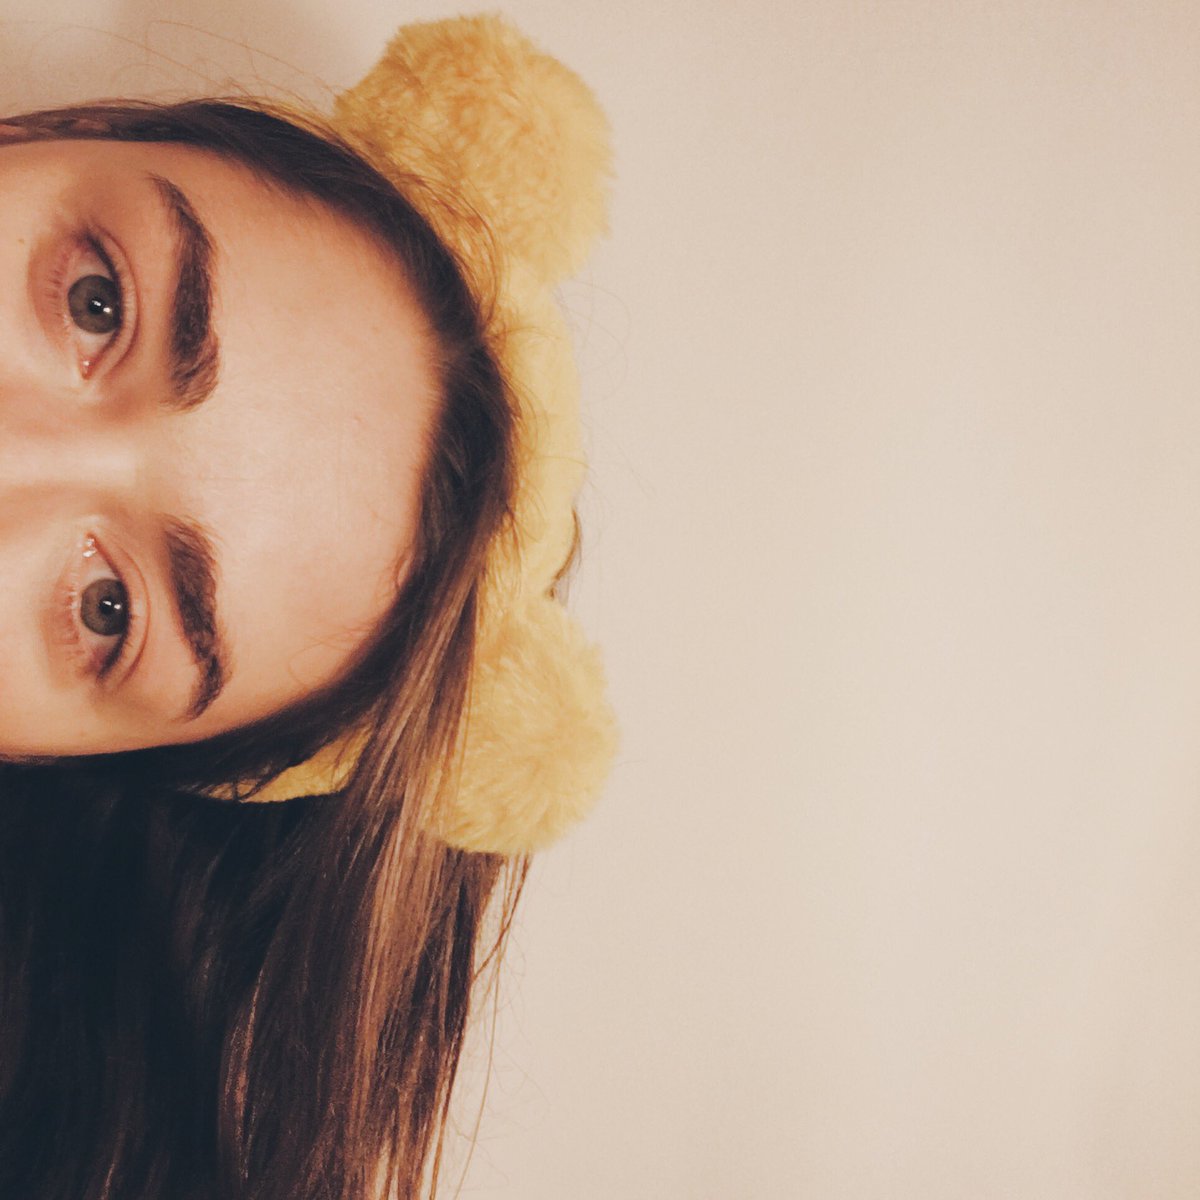 GET YOUR EARS ON FOR @BBC CHILDREN IN NEED #CiN 
https://t.co/QSZ1Bh22wN https://t.co/45Q9pYV6ba